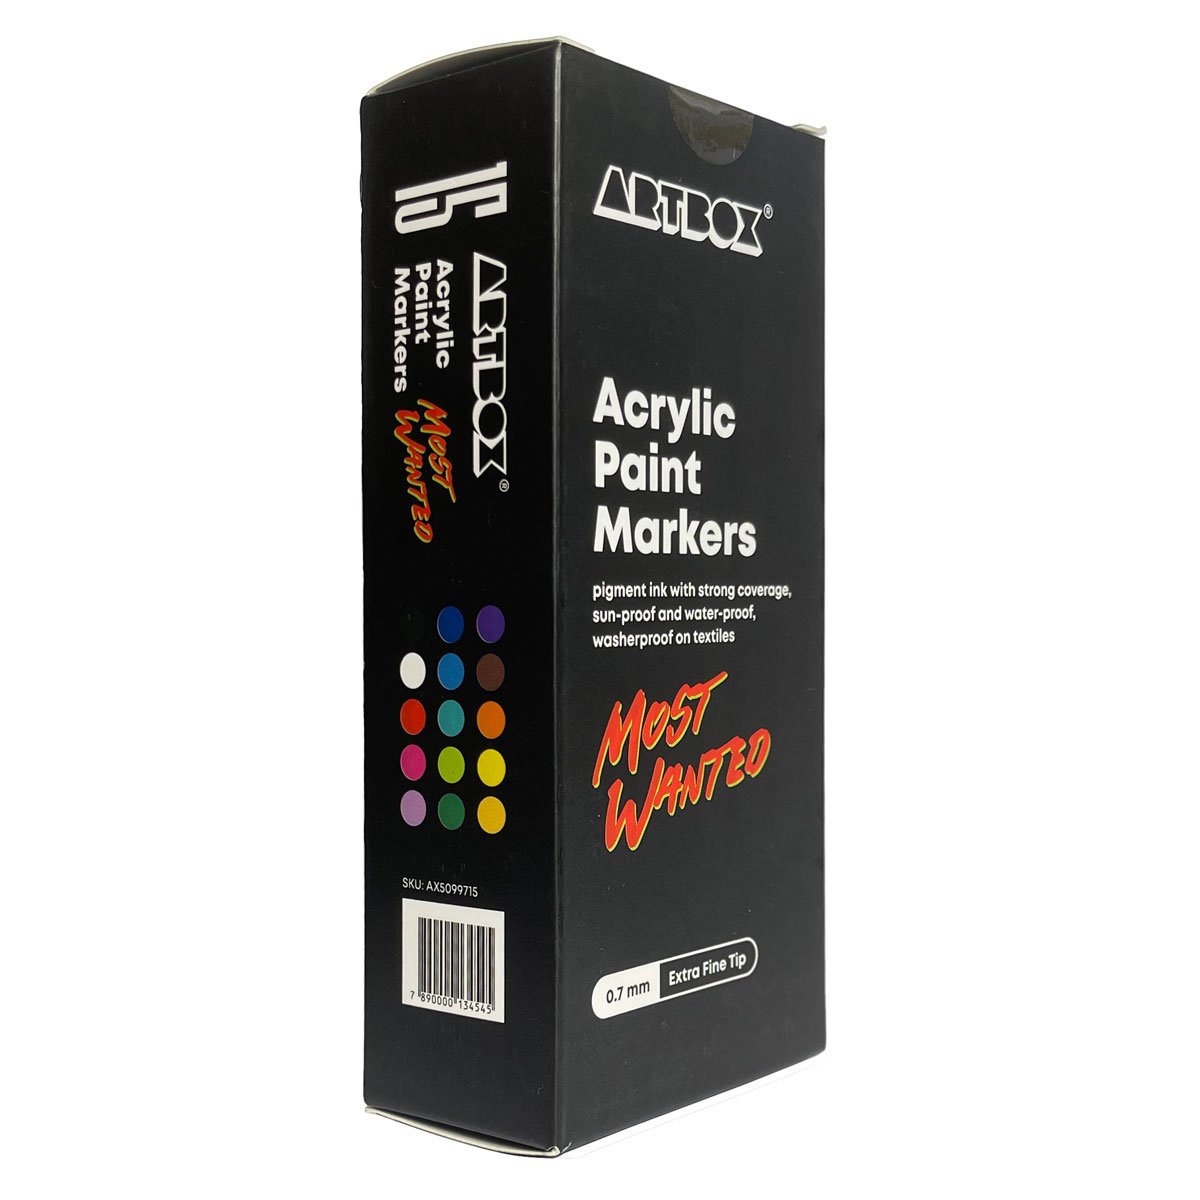 Set 15 markere - Acrylic Paint - Most Wanted, 0.7 mm | Artbox